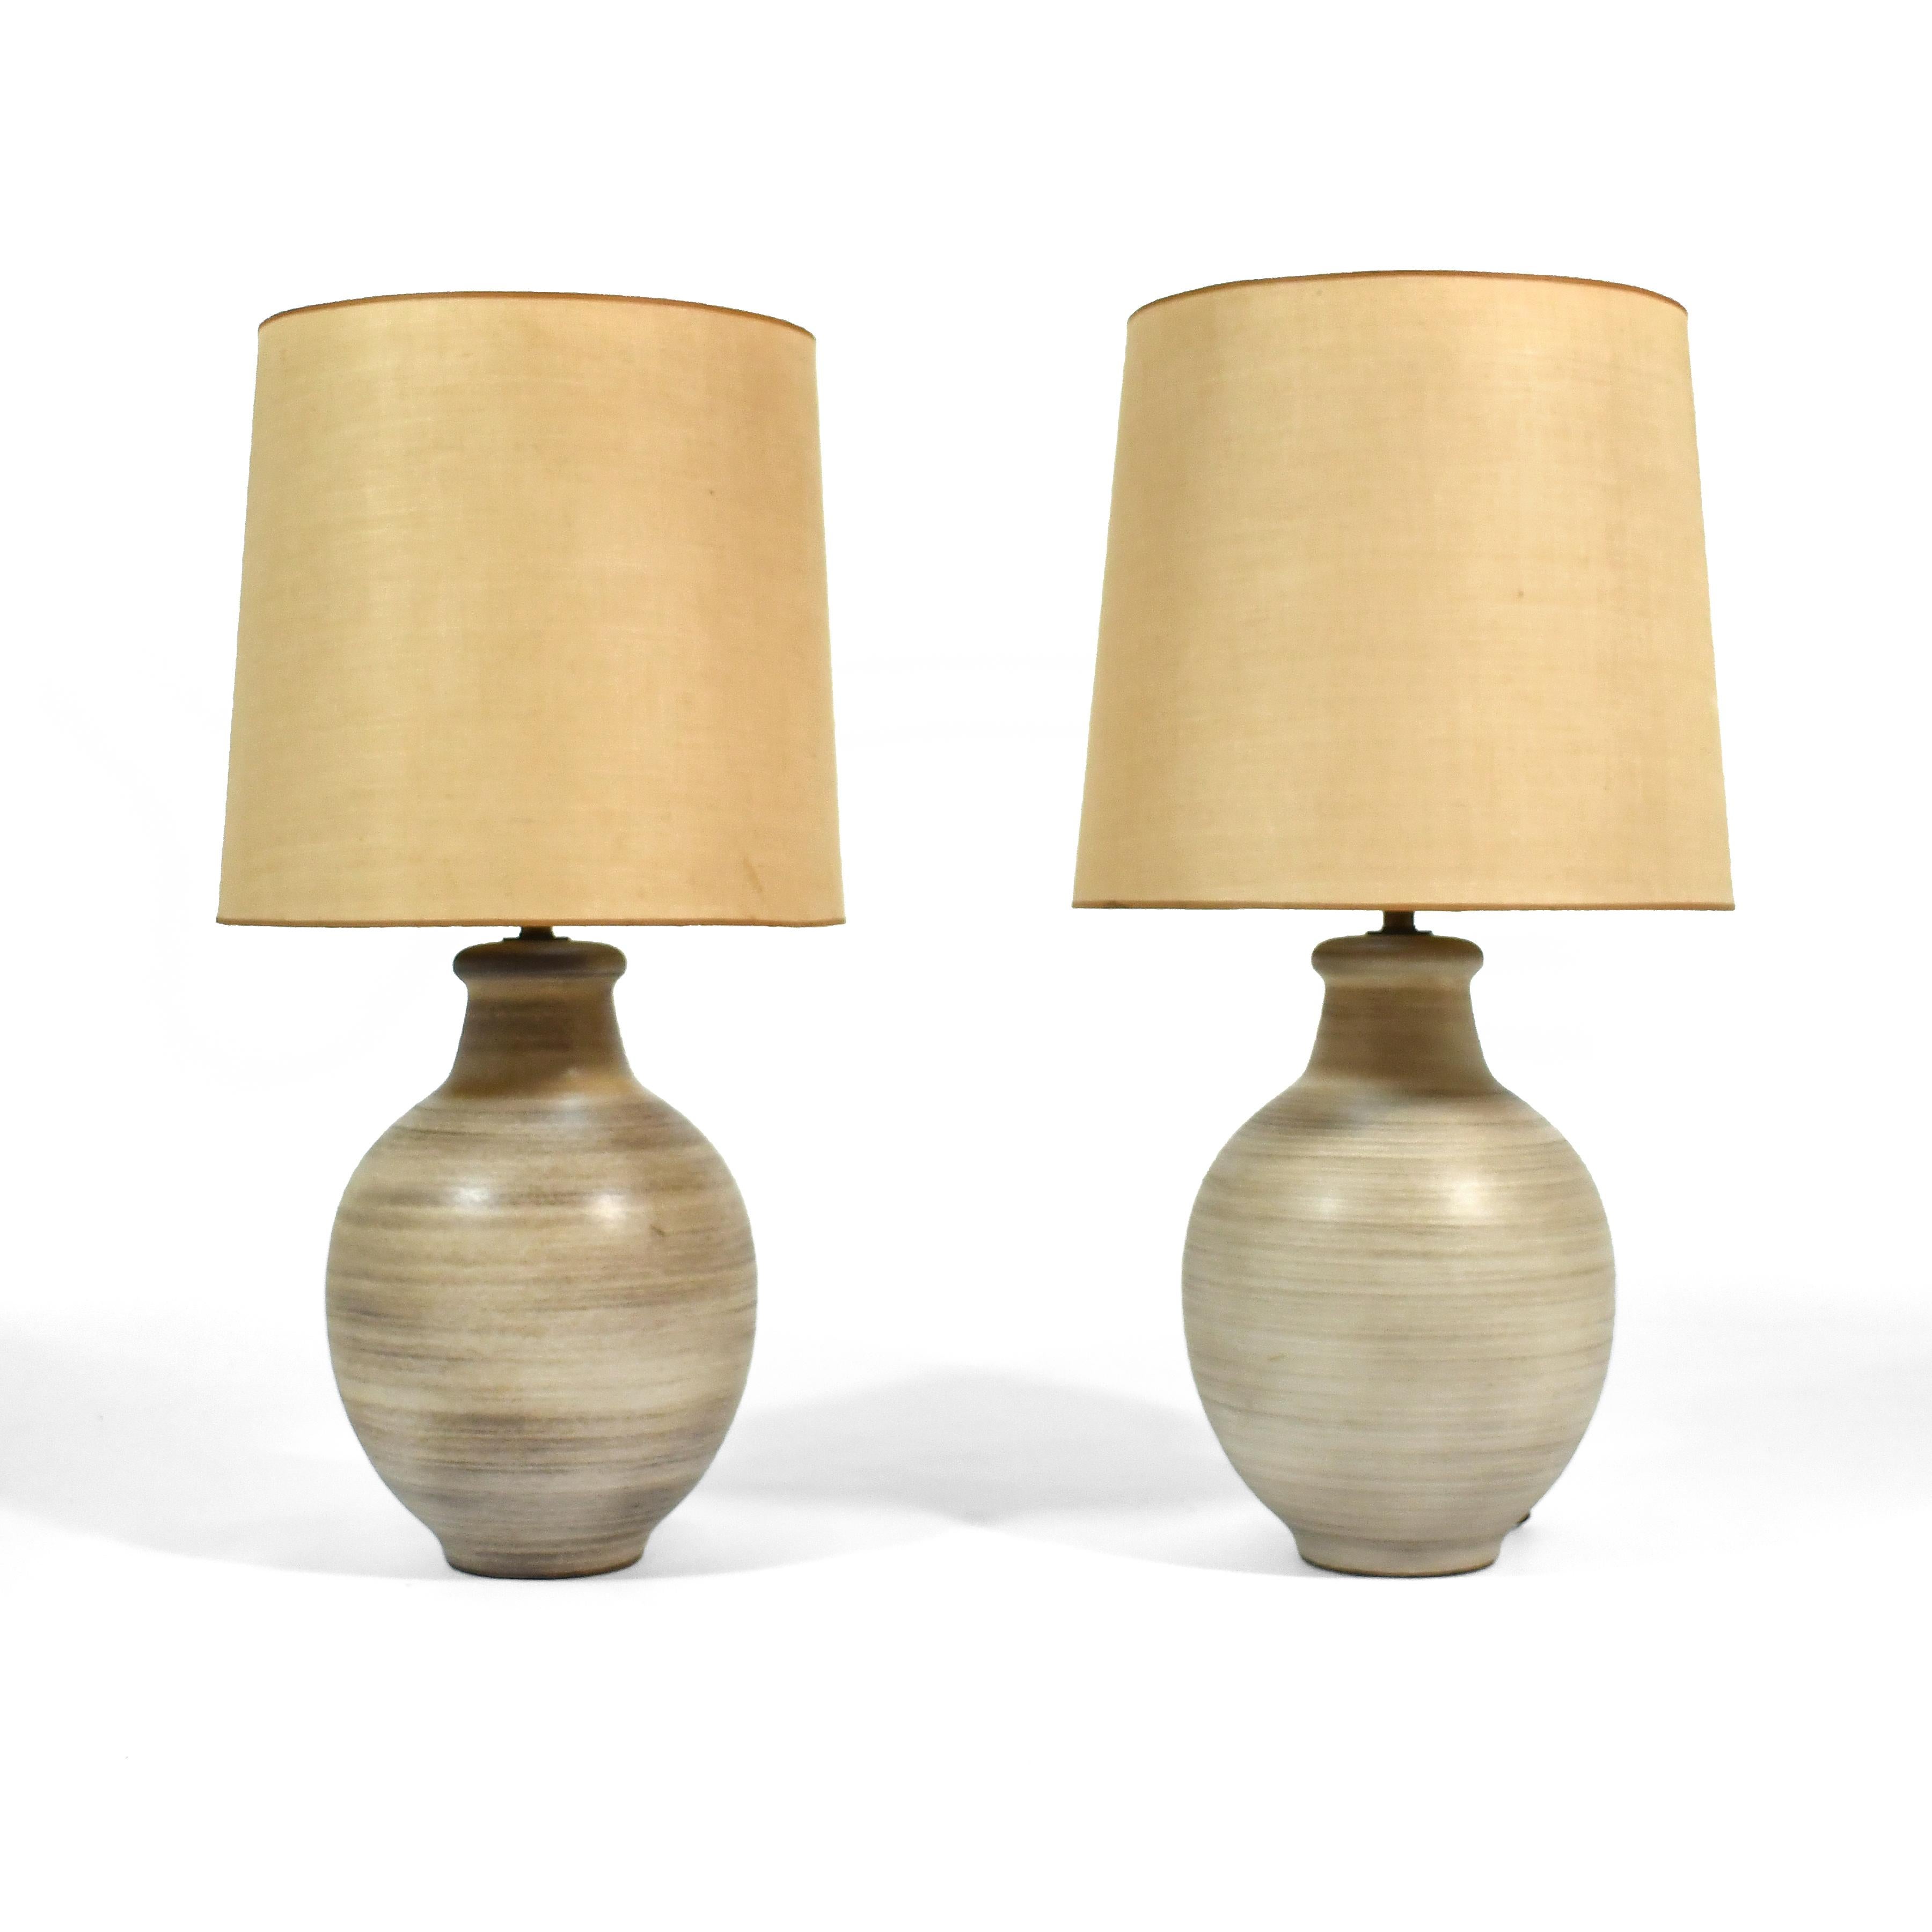 This pair of striking large Design Technics table lamps have a subtle earthy colored glaze with textured horizontal lines.

The original shades are in need of replacement, so the lamps are being sold sans shades.

33.5